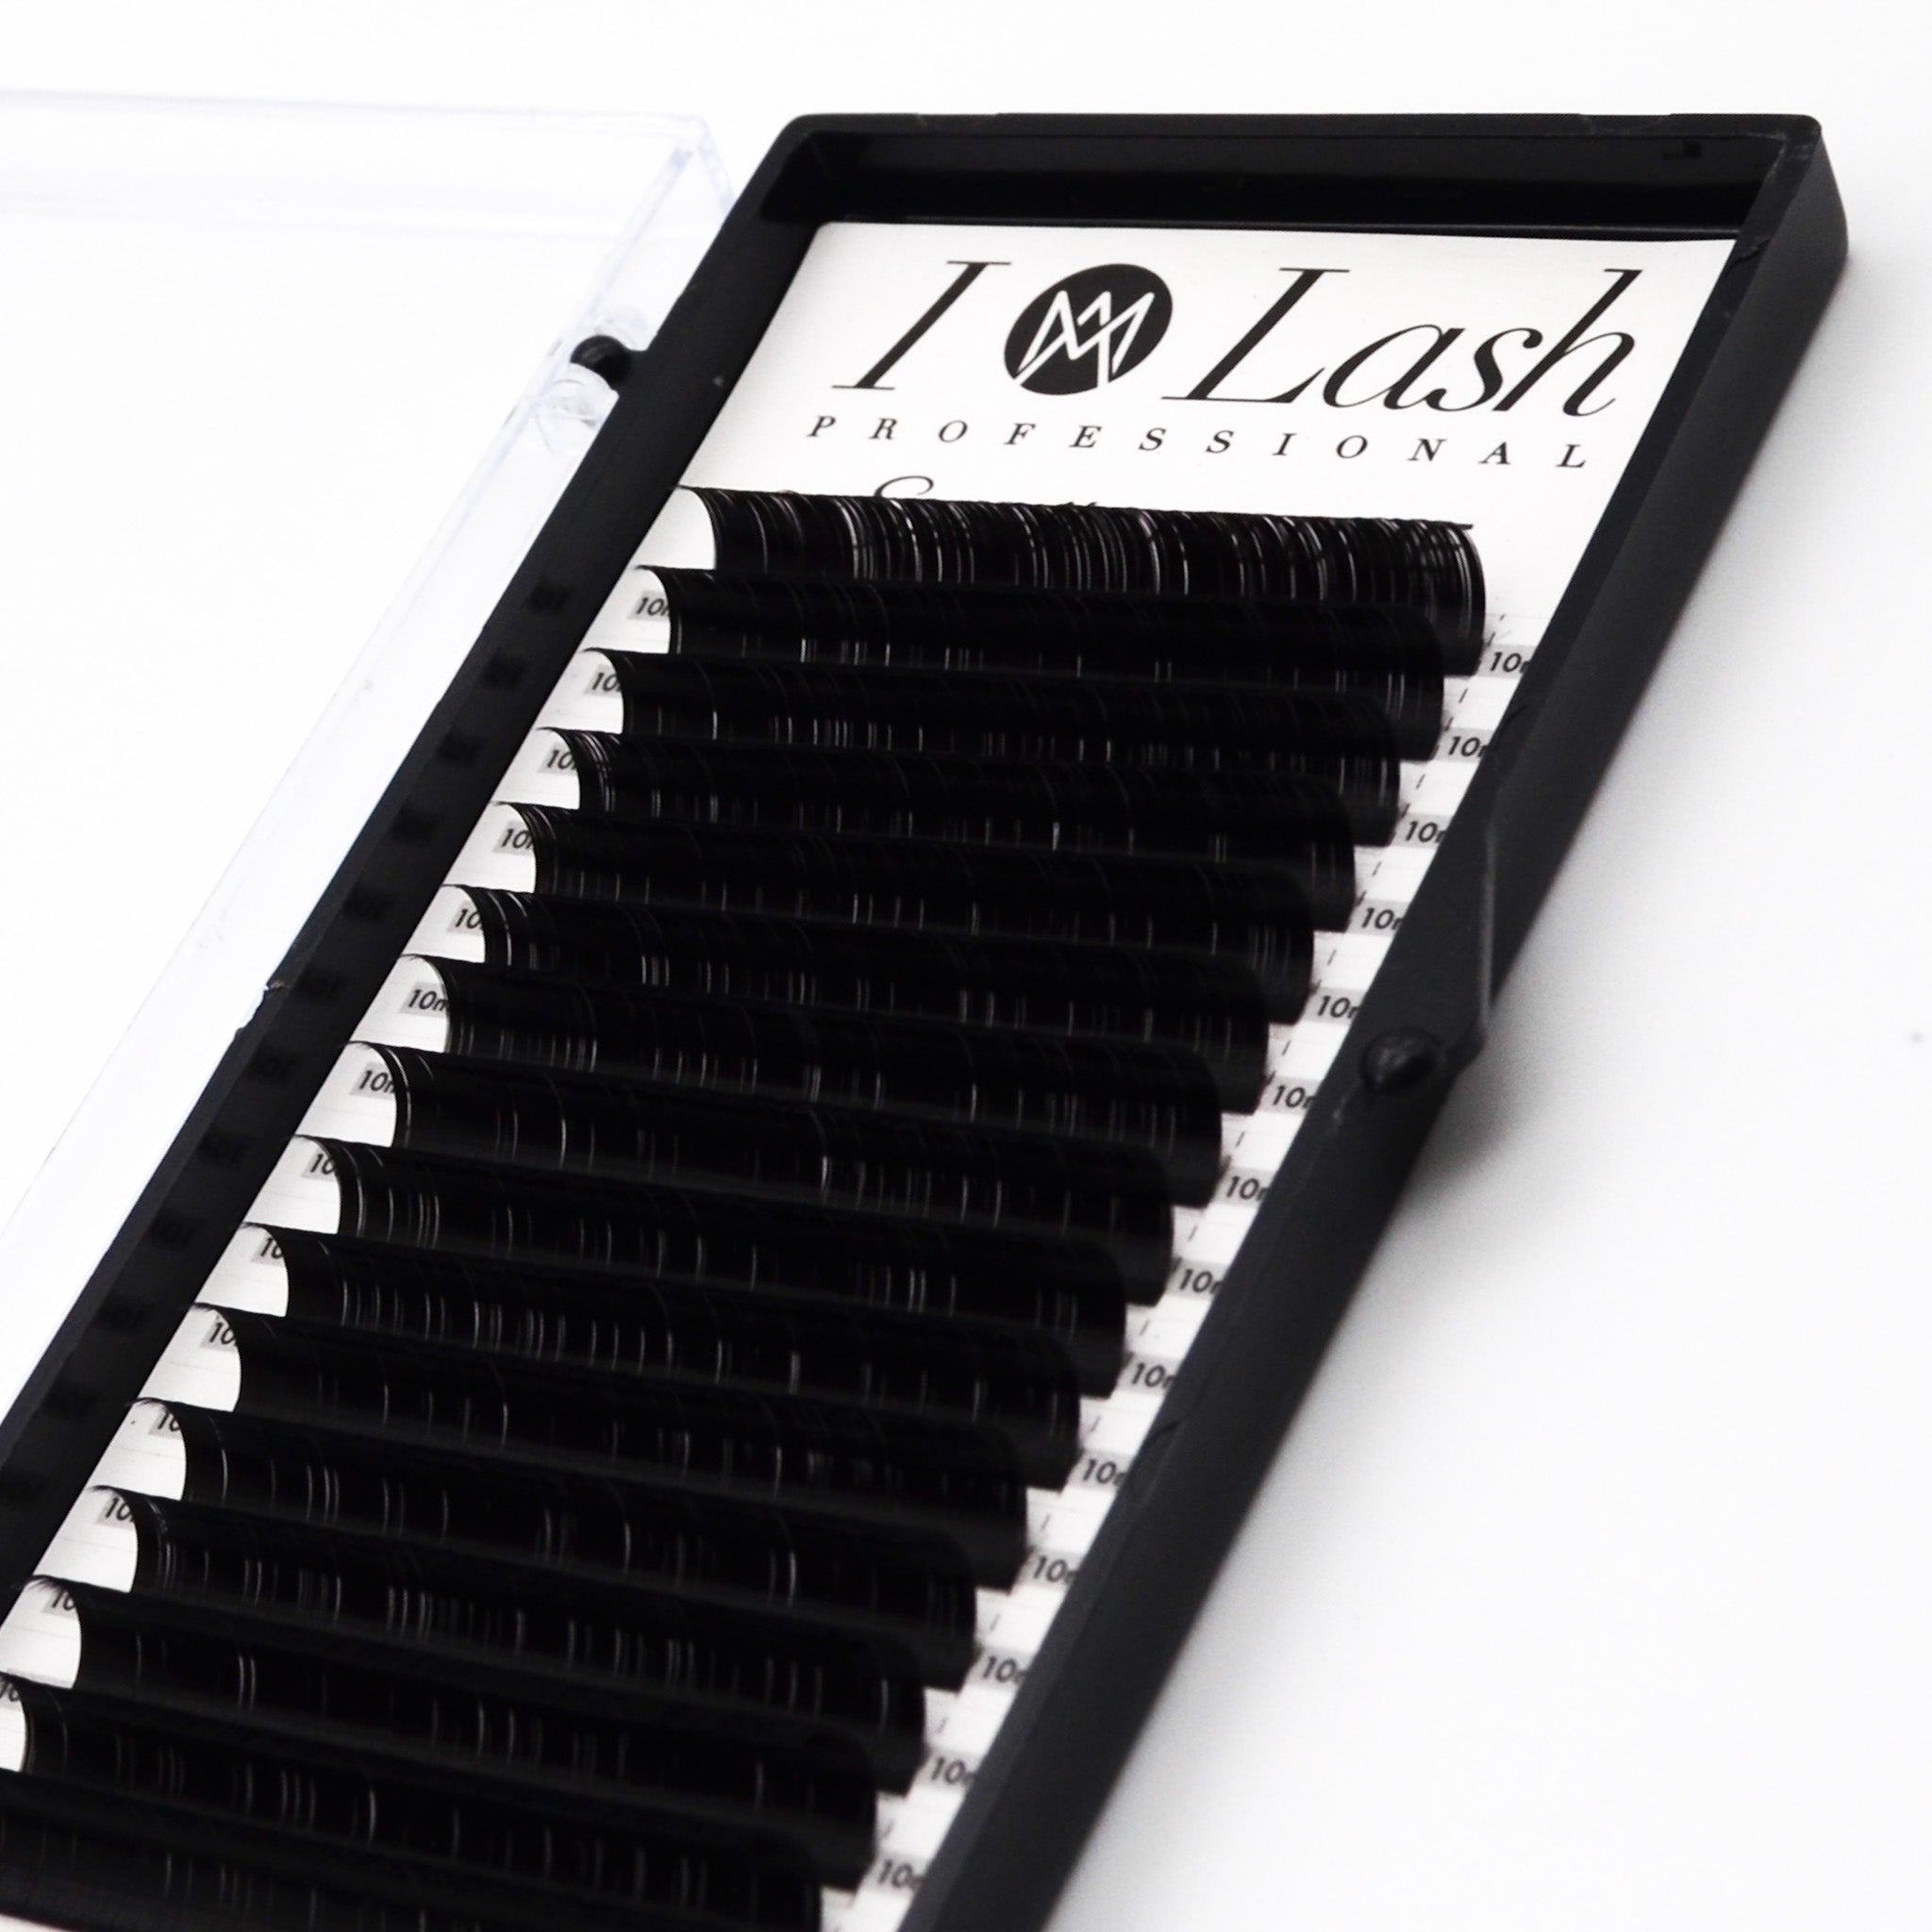 0.06 thickness eyelash extensions. Easy to fan volume lashes.